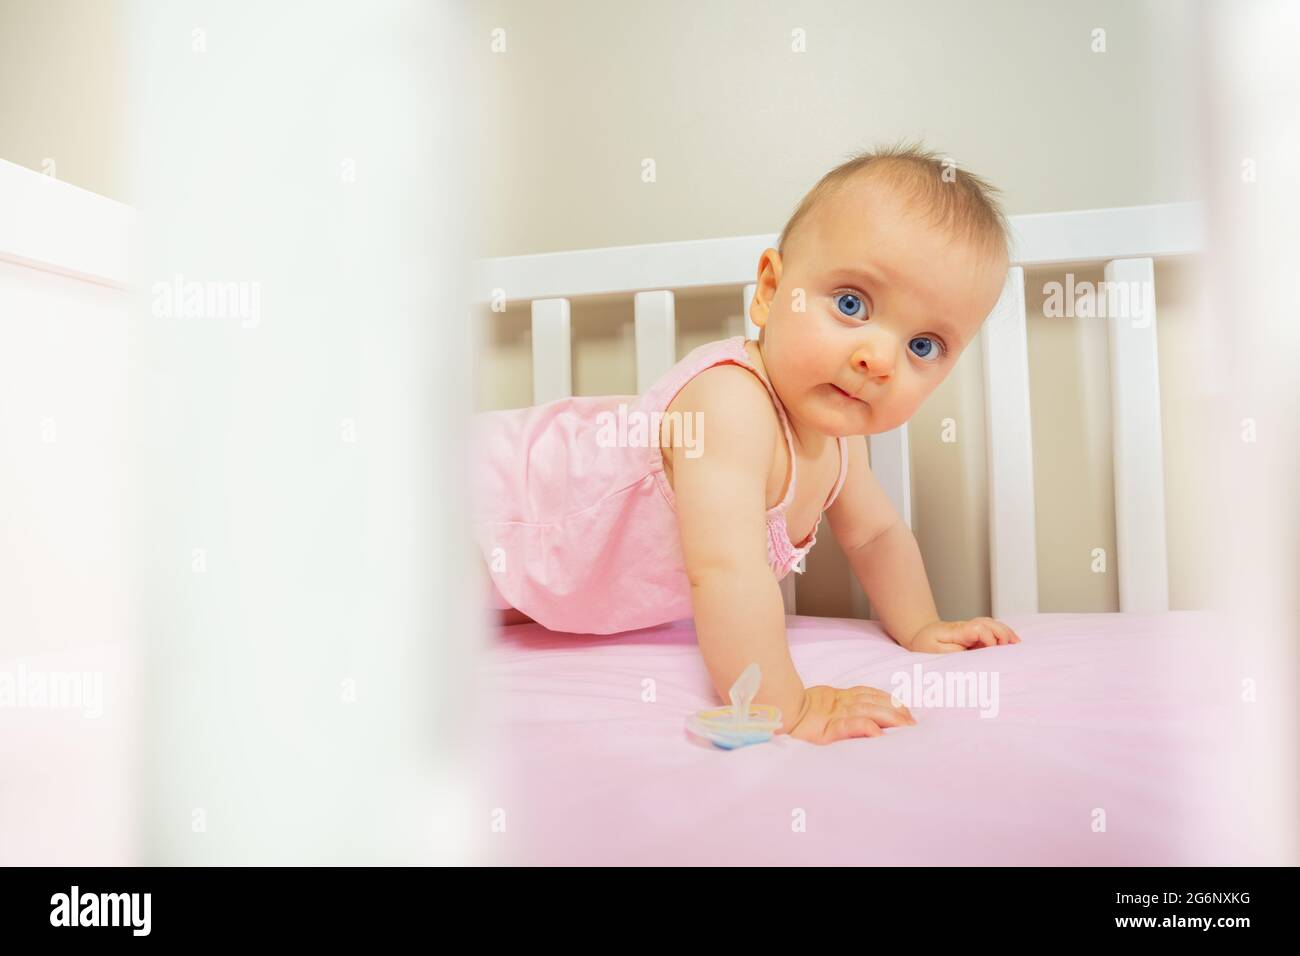 Baby girl stand on hands in the pink color bed Stock Photo